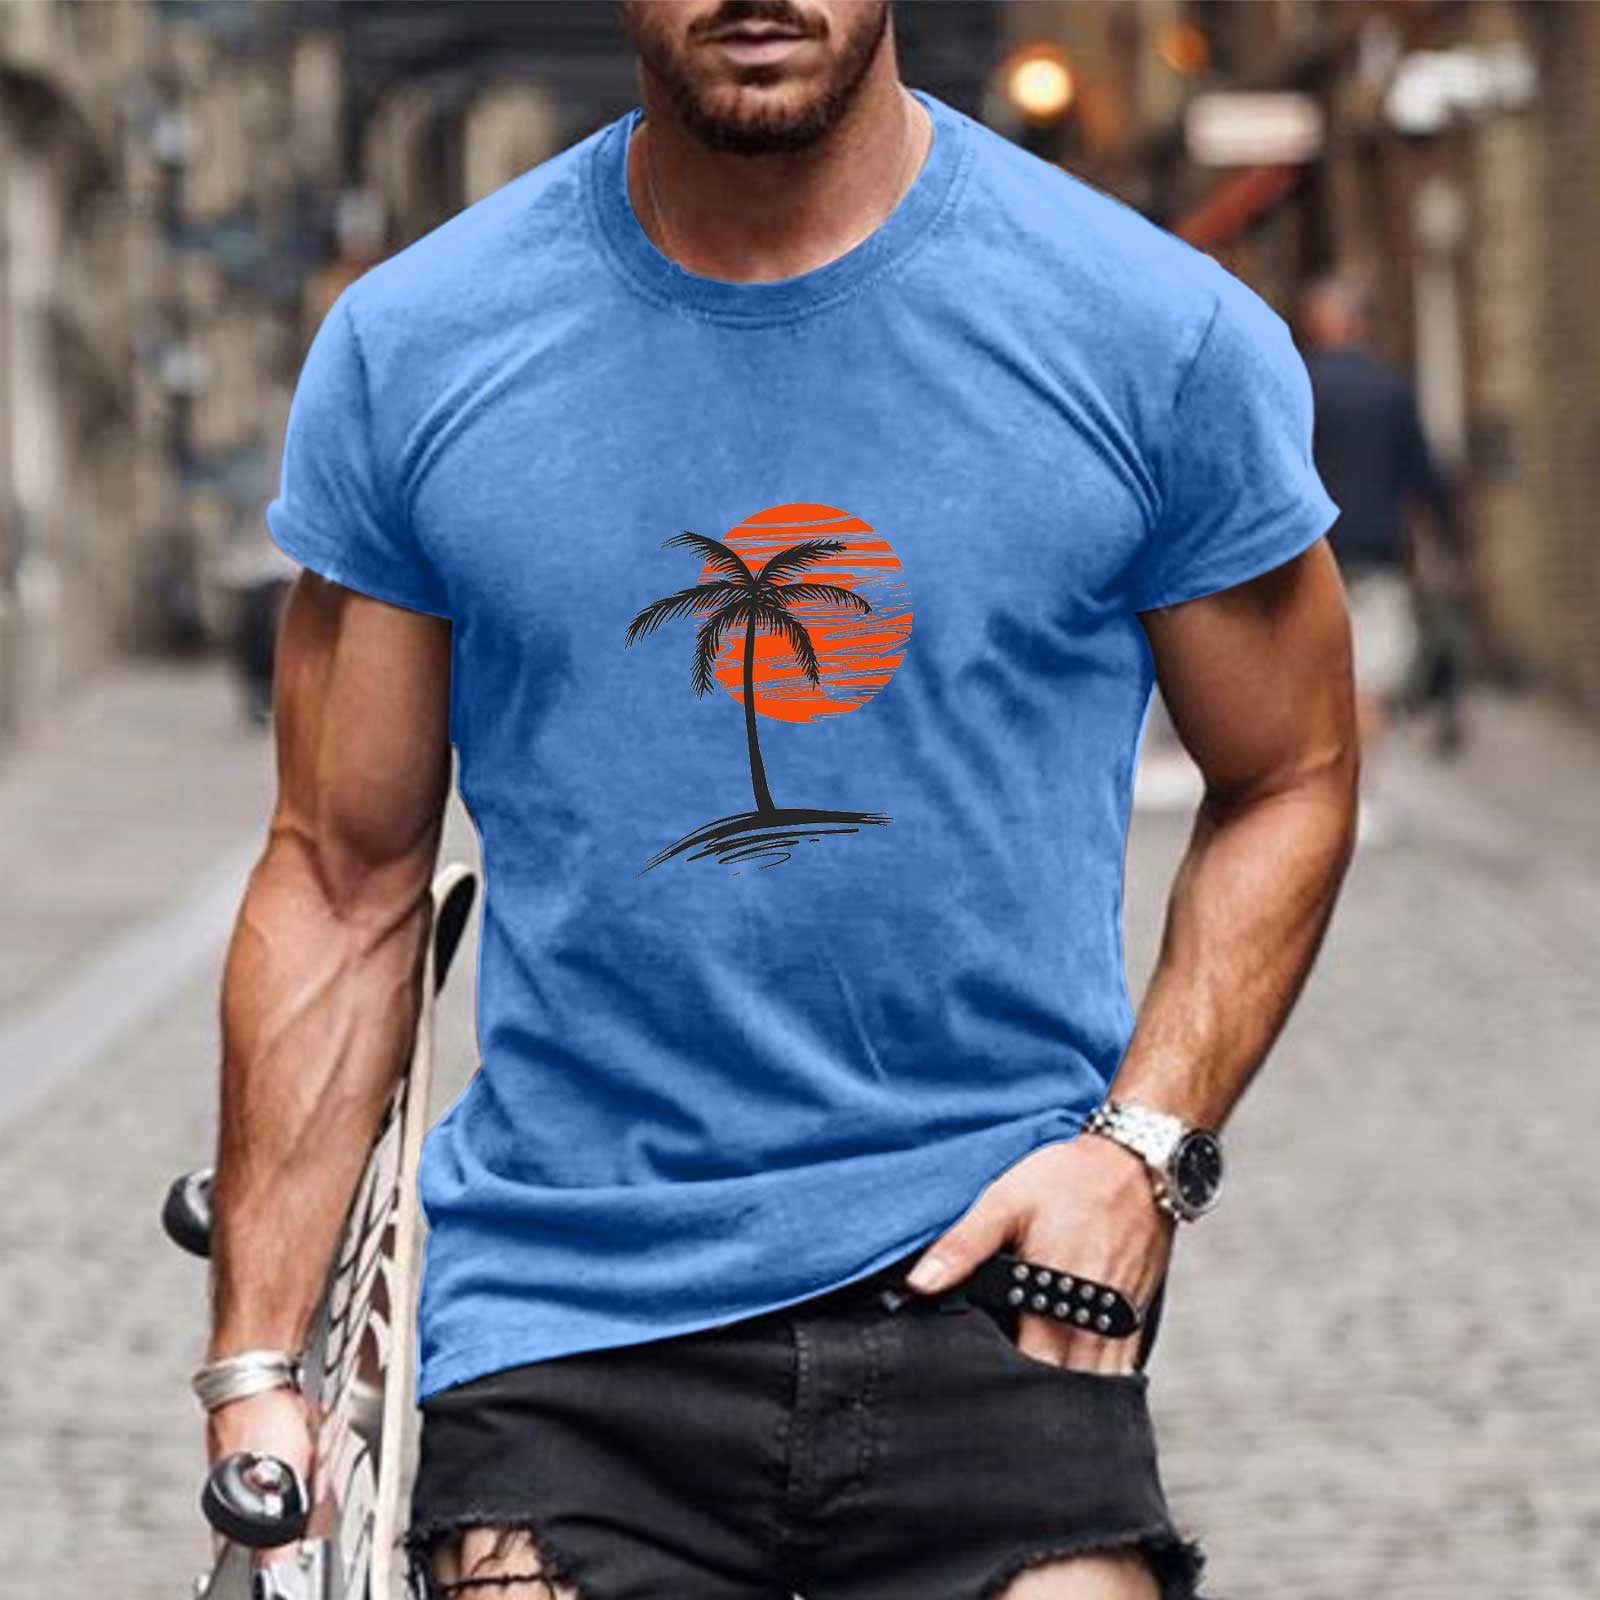 ZCFZJW Mens Summer Muscle T-Shirts Casual Short Sleeve Sunset Palm Tree  Graphic Crewneck Pullover Tshirt Tops Holiday Beach Tropical Shirts Blue L